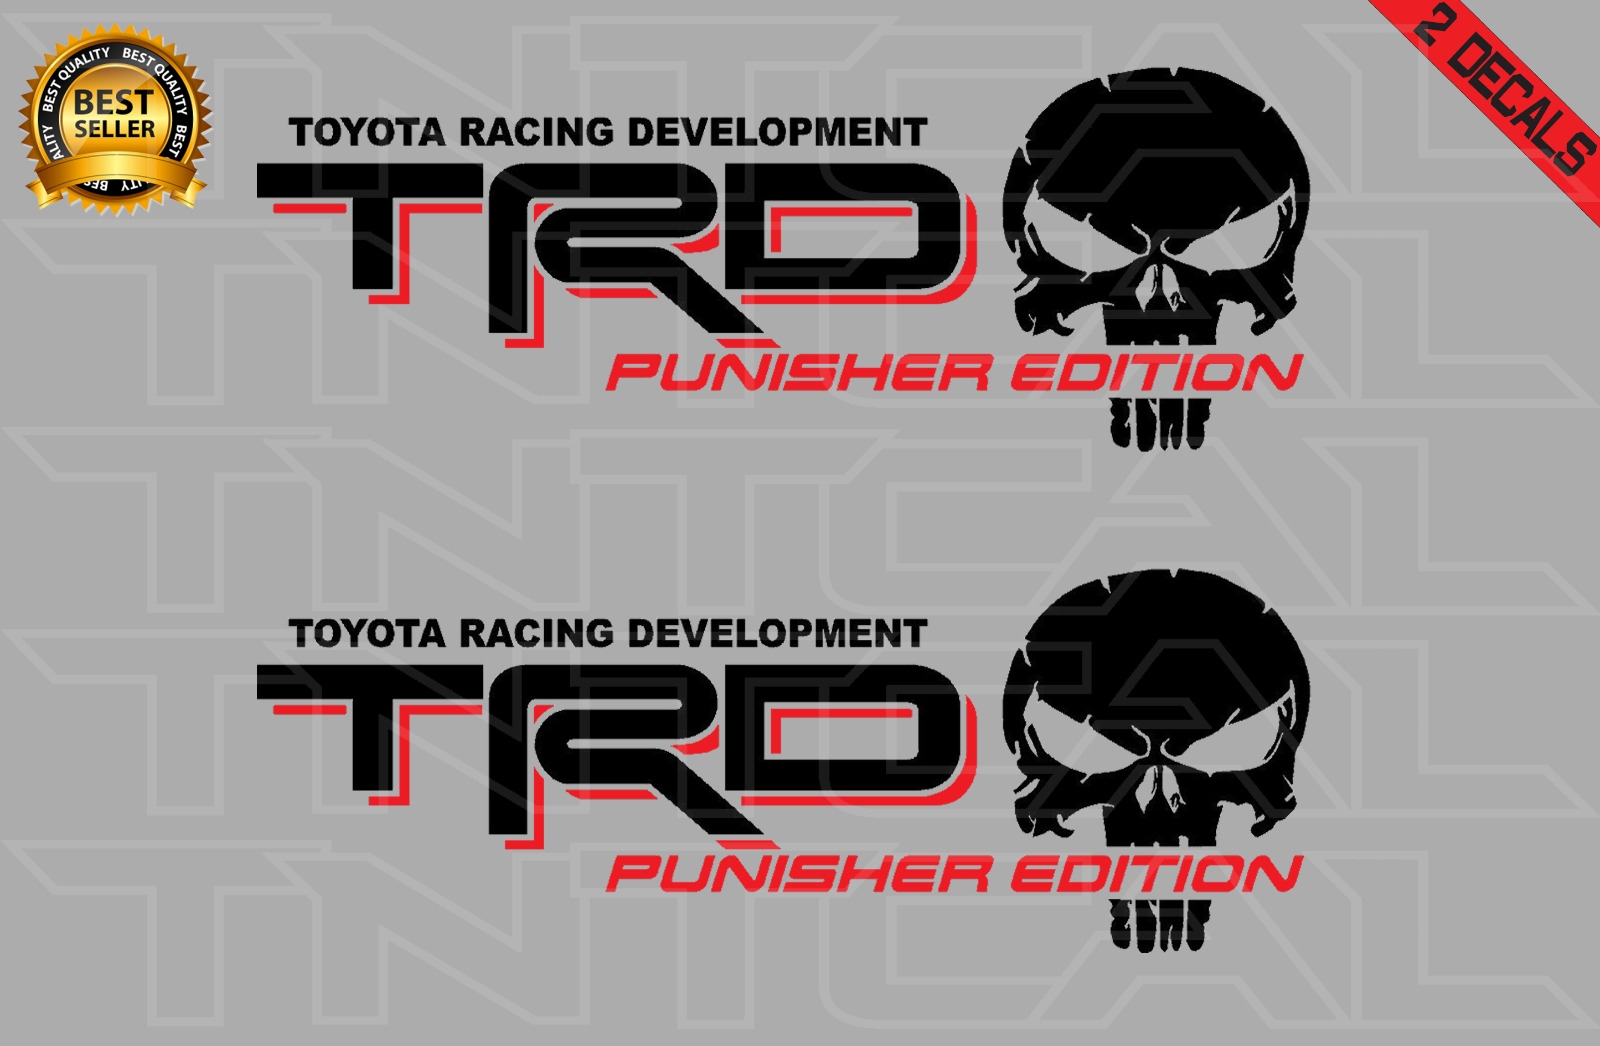 TRD PUNISHER EDITION Decal Set Toyota Tacoma Tundra Vinyl Stickers black/red